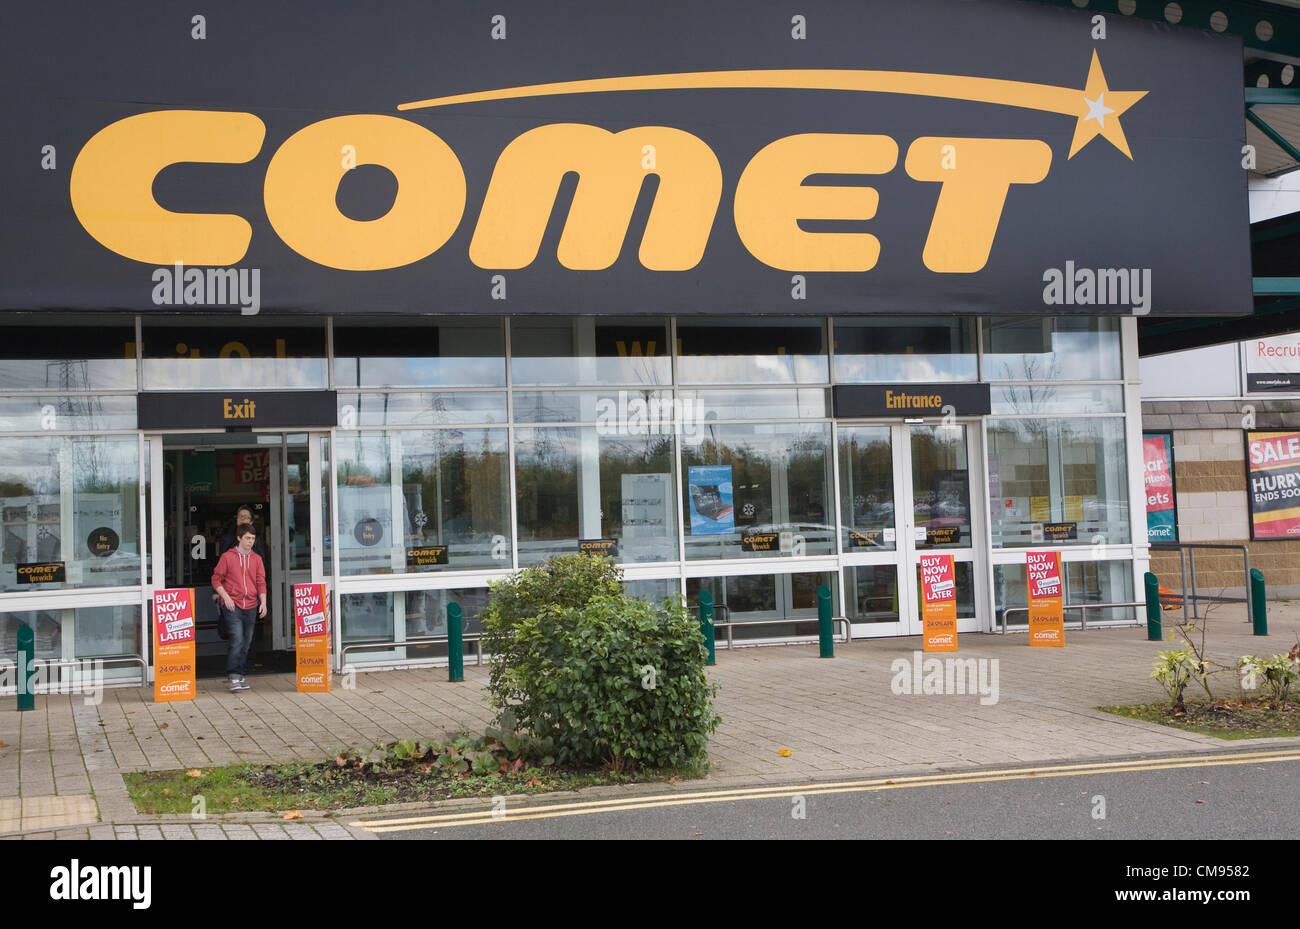 Ipswich, Suffolk. 1 November 2012 Comet store at Anglia Retail Park, Ipswich, England one of some 250 stores employing 6,500 Stock Photo